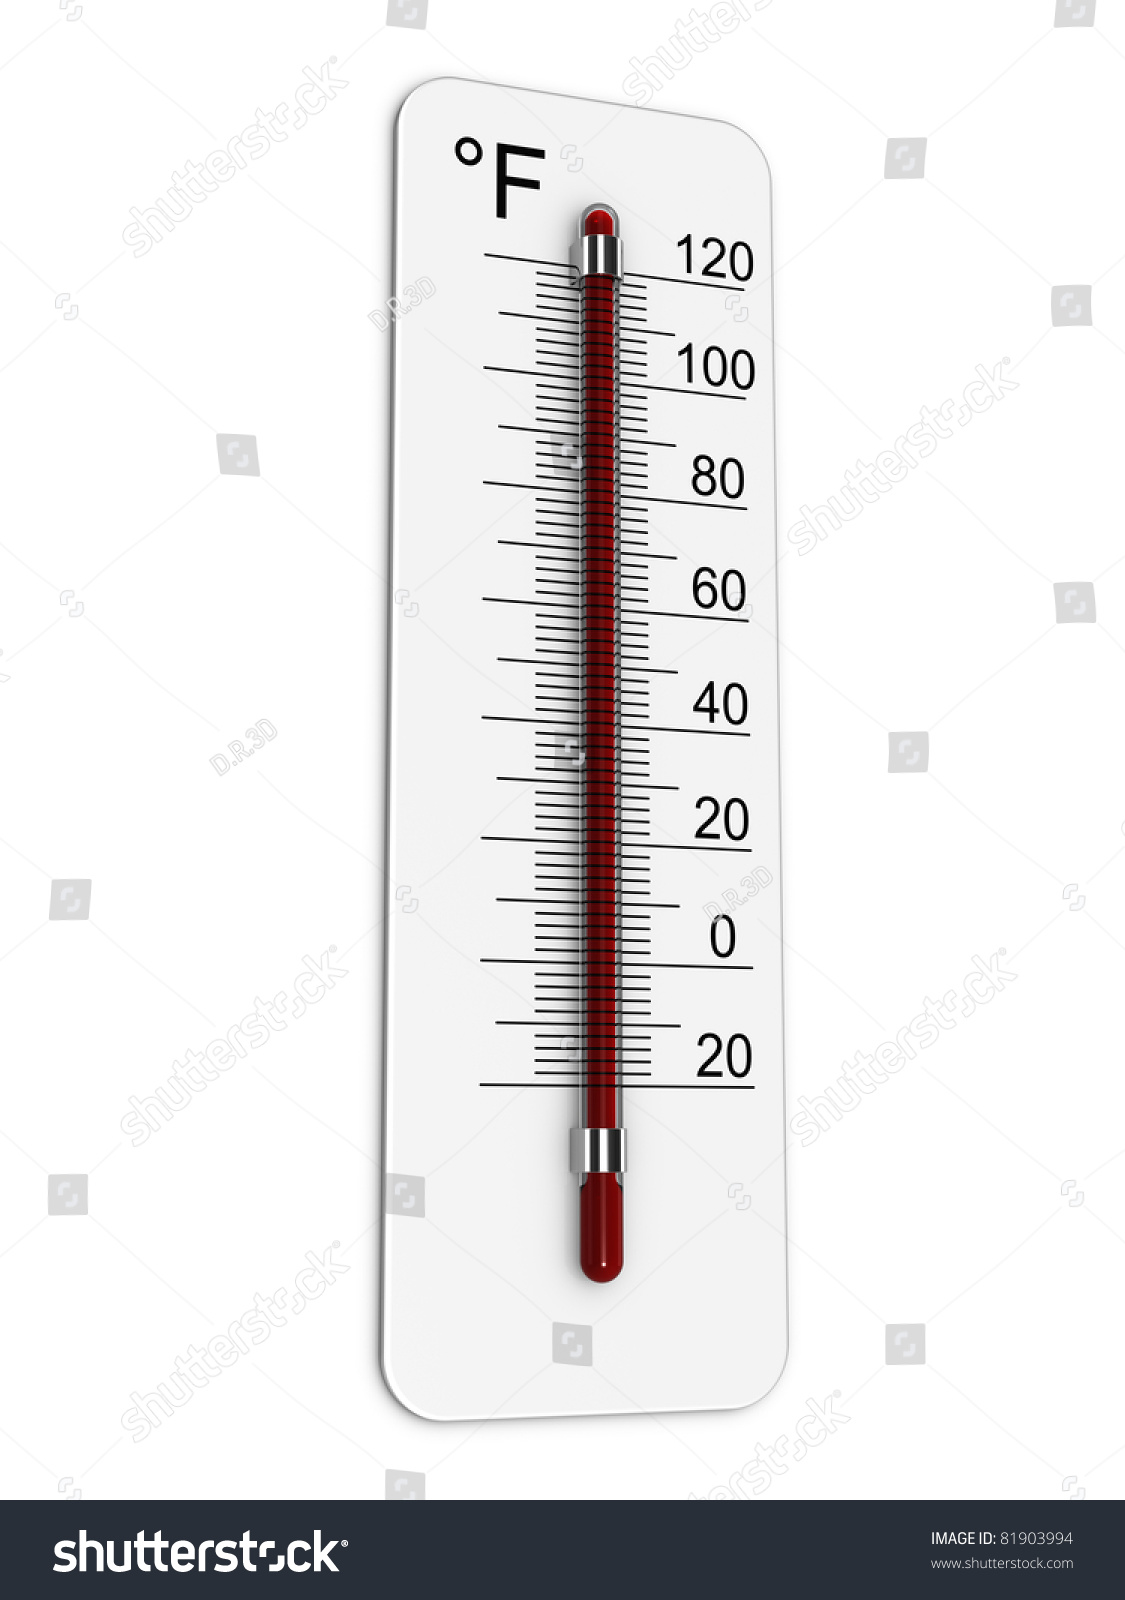 extreme temperature thermometer